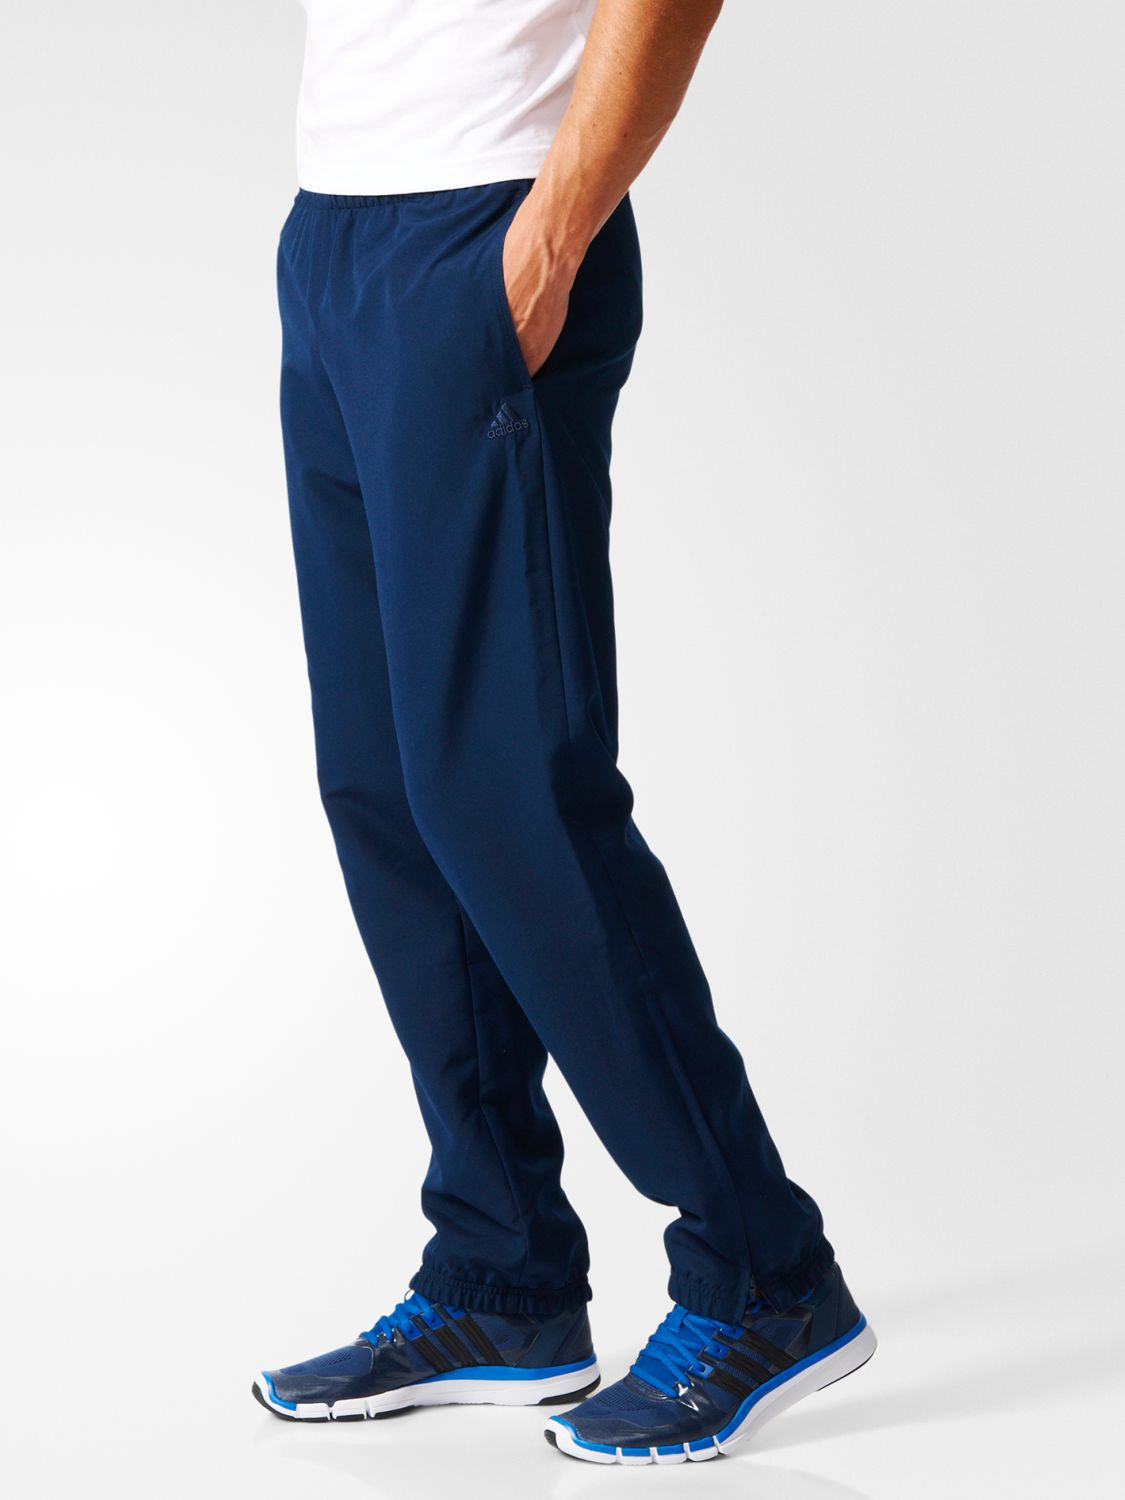 adidas cuffed tracksuit bottoms in navy